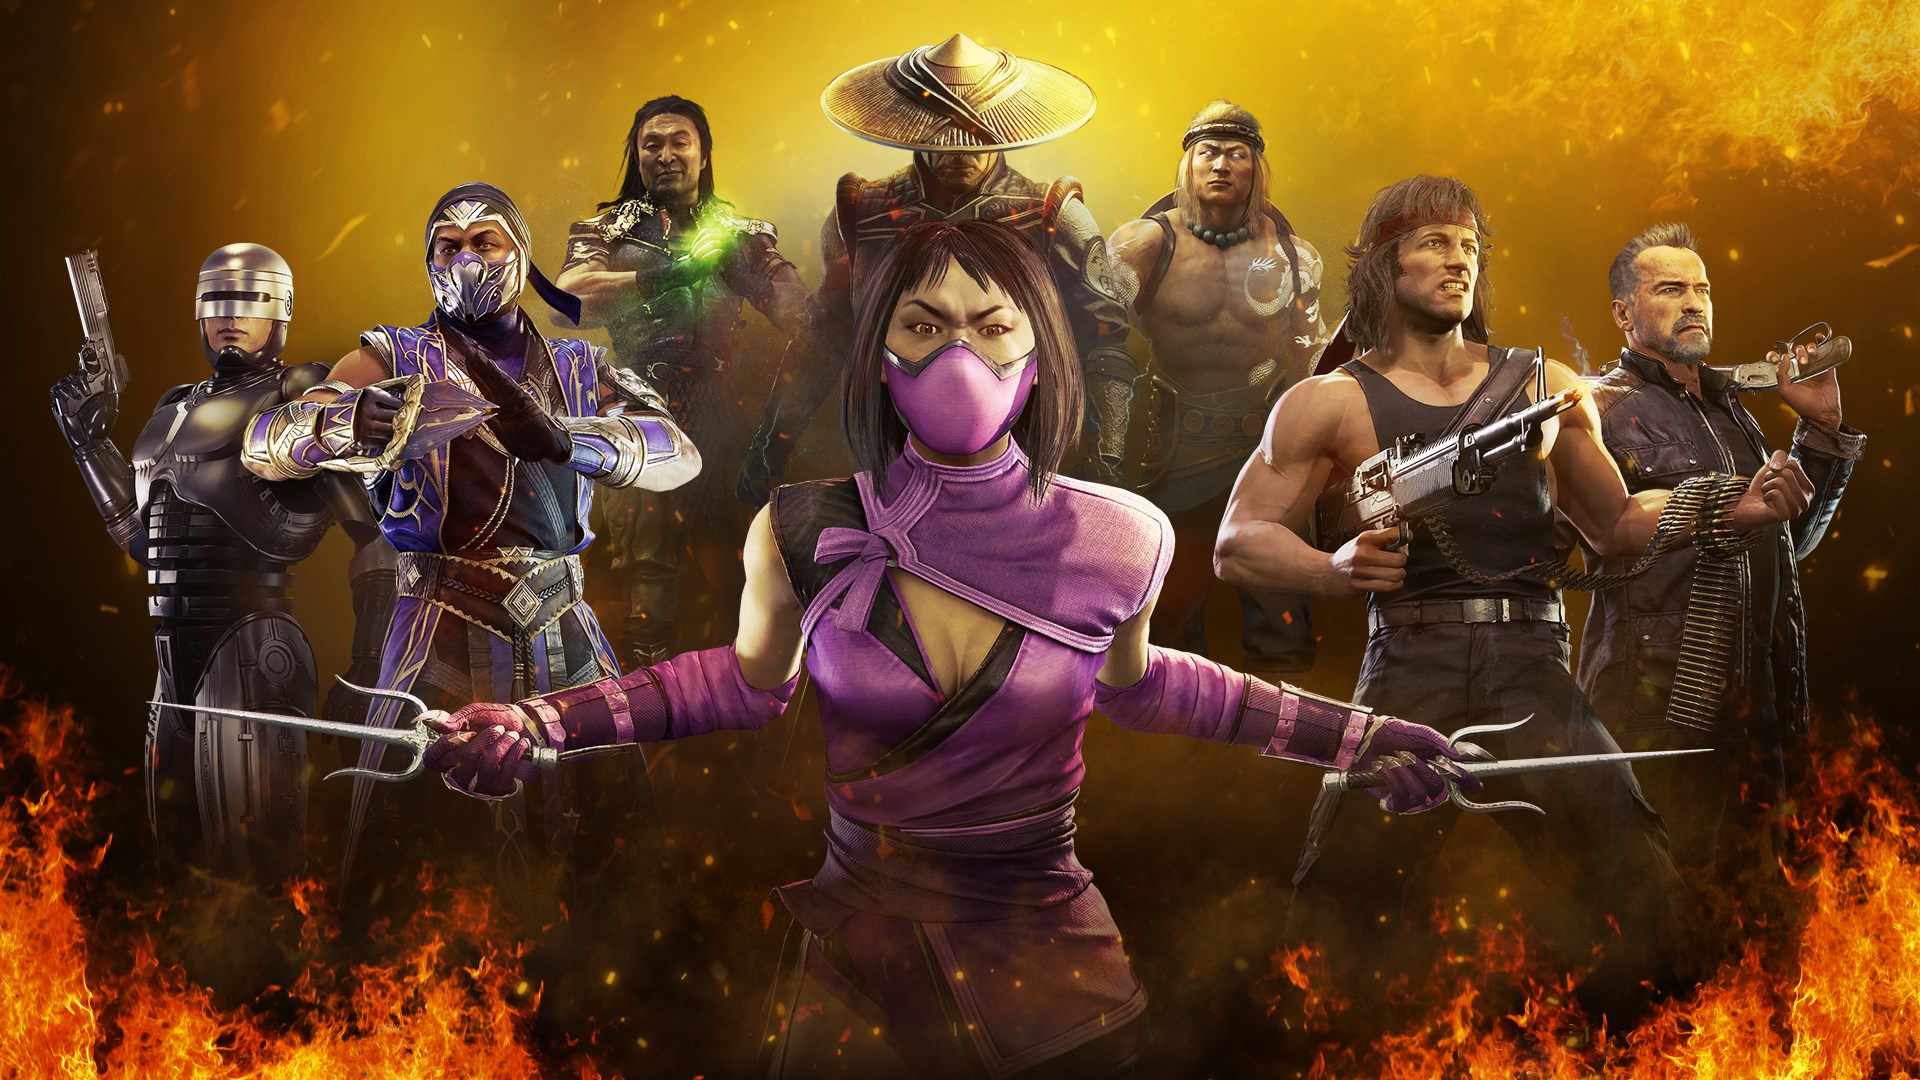 Mortal Kombat 12: Will It Be Influenced by the Live-Action Movie?